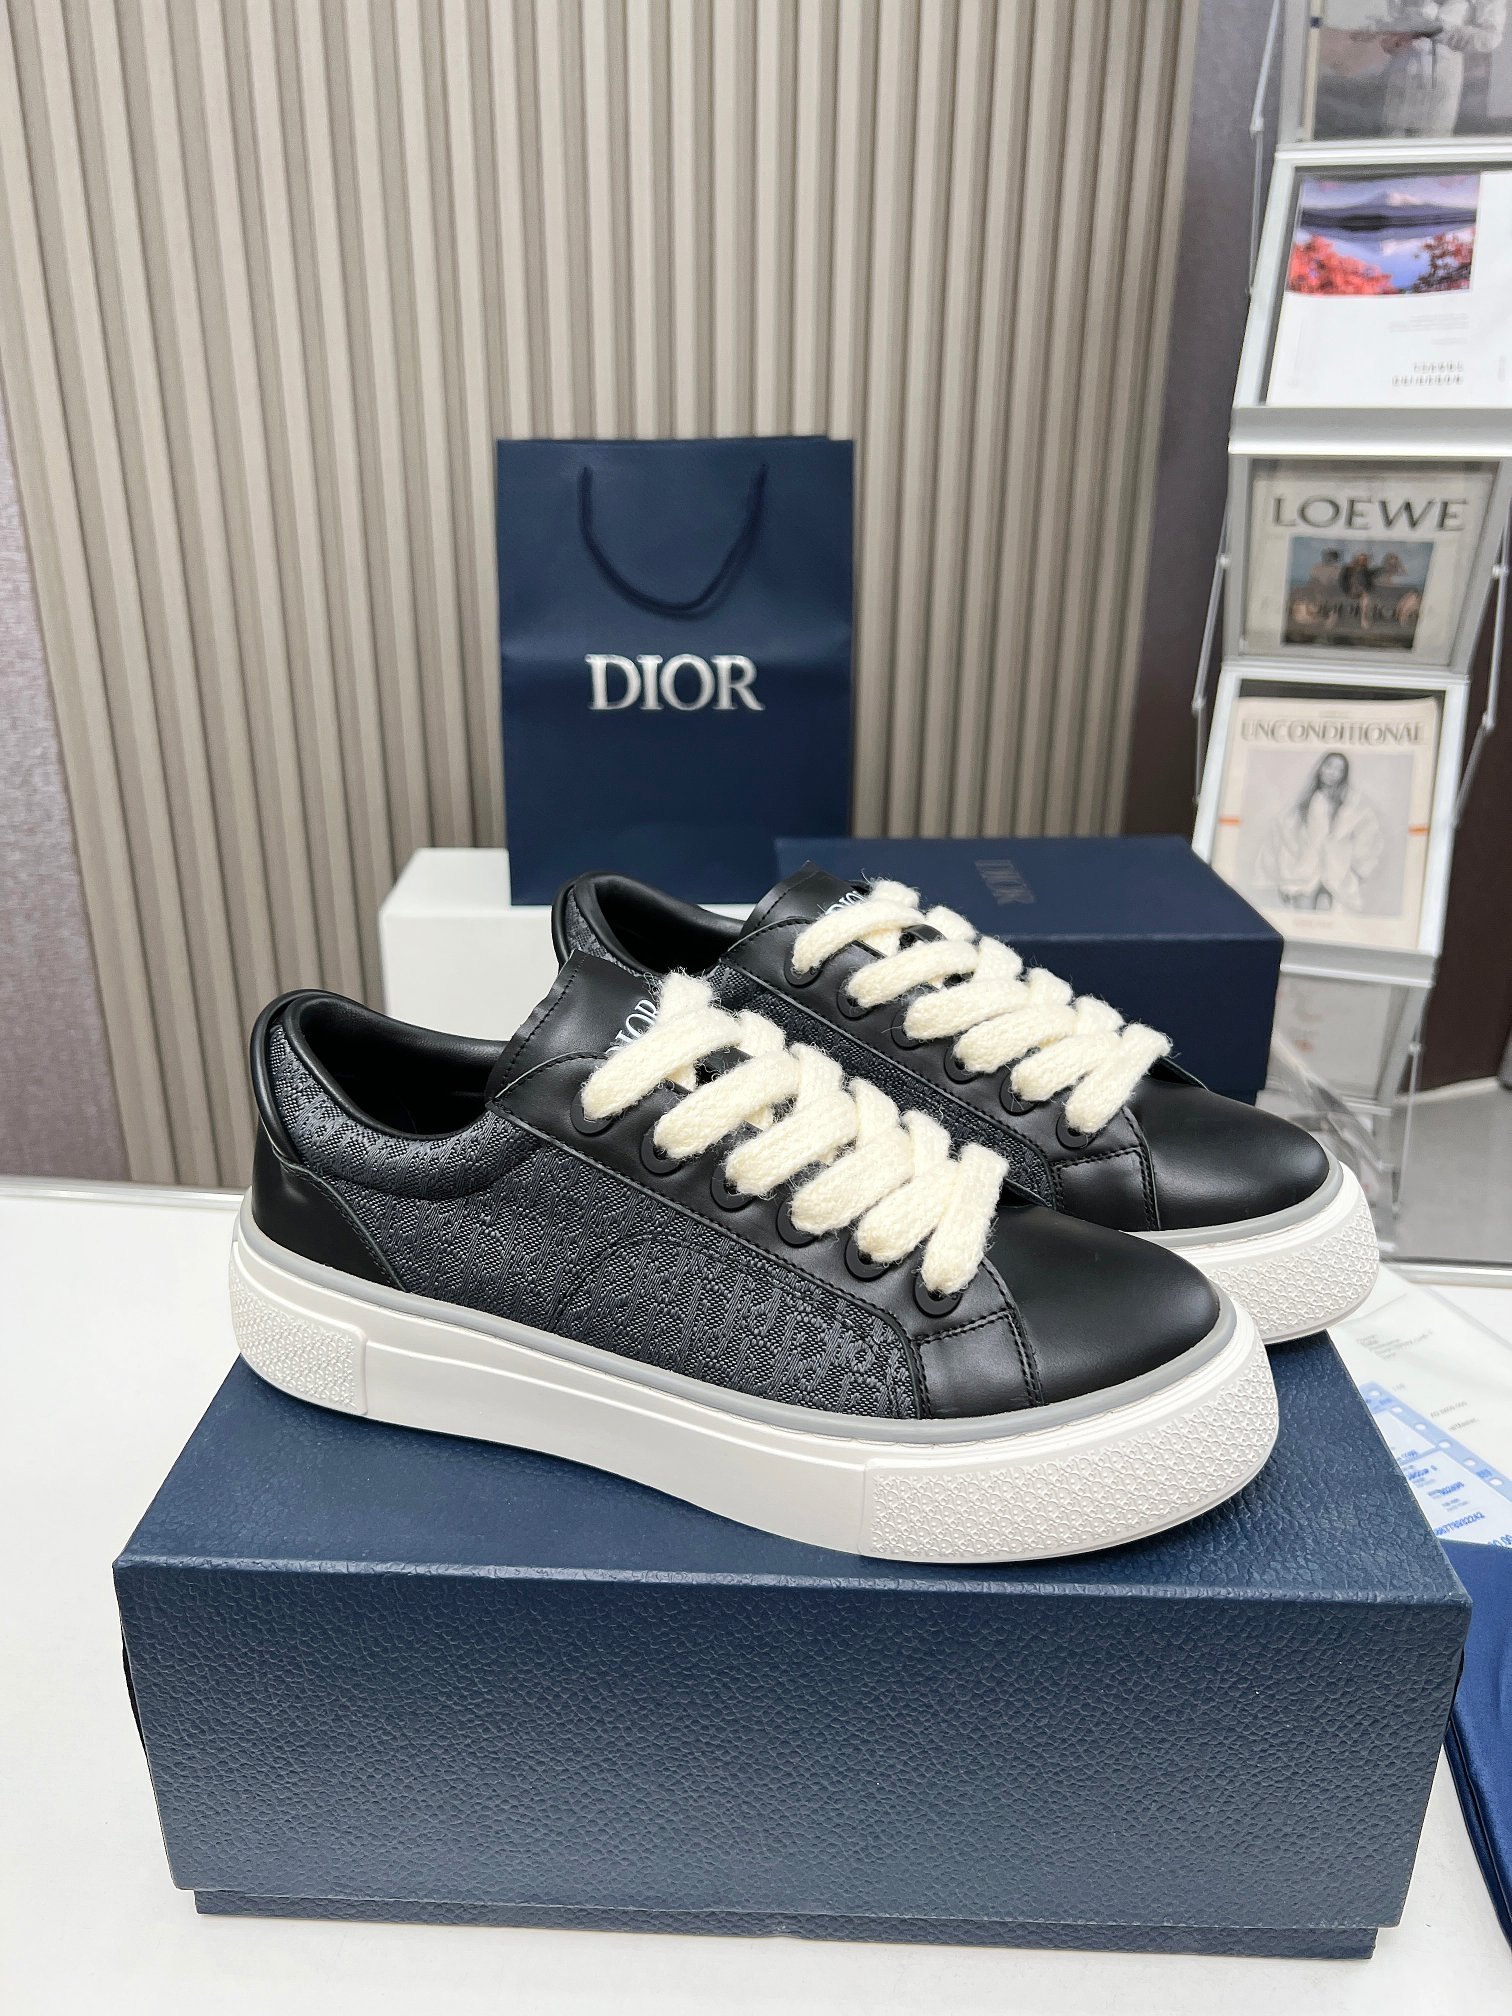 Dior Shoes Sneakers Blue Navy White Yellow Printing Women Men Cotton Denim Rubber Fall Collection Oblique Casual